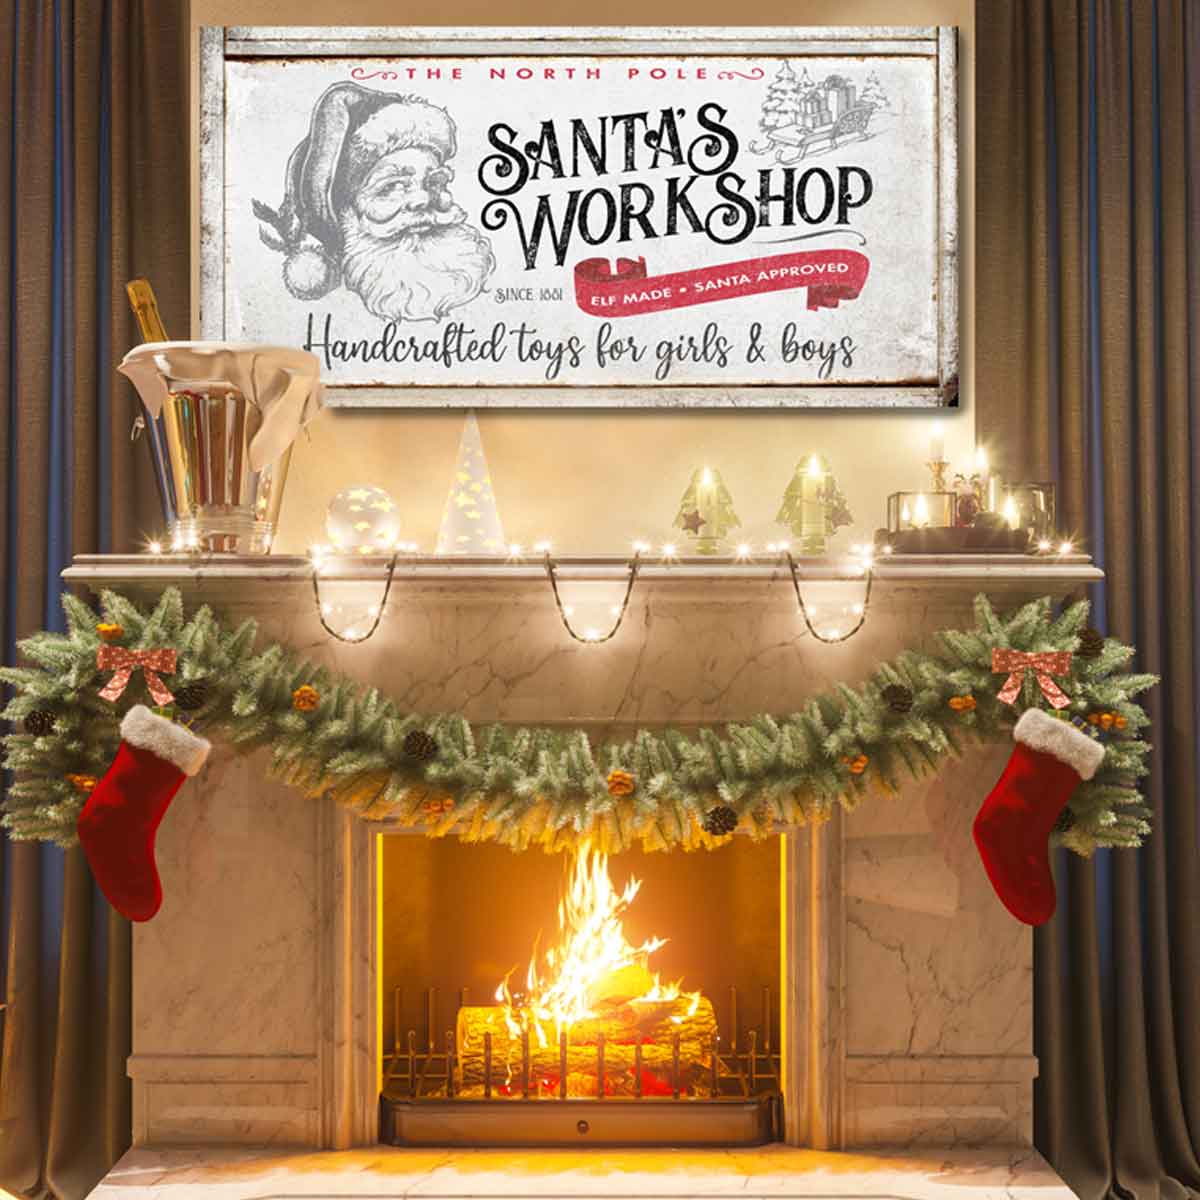 Santa's Workshop Christmas Wall Art sign with the words [The North Pole Santa's Workshop - Handcrafted toys for girls & boys] on antique faux wood frame